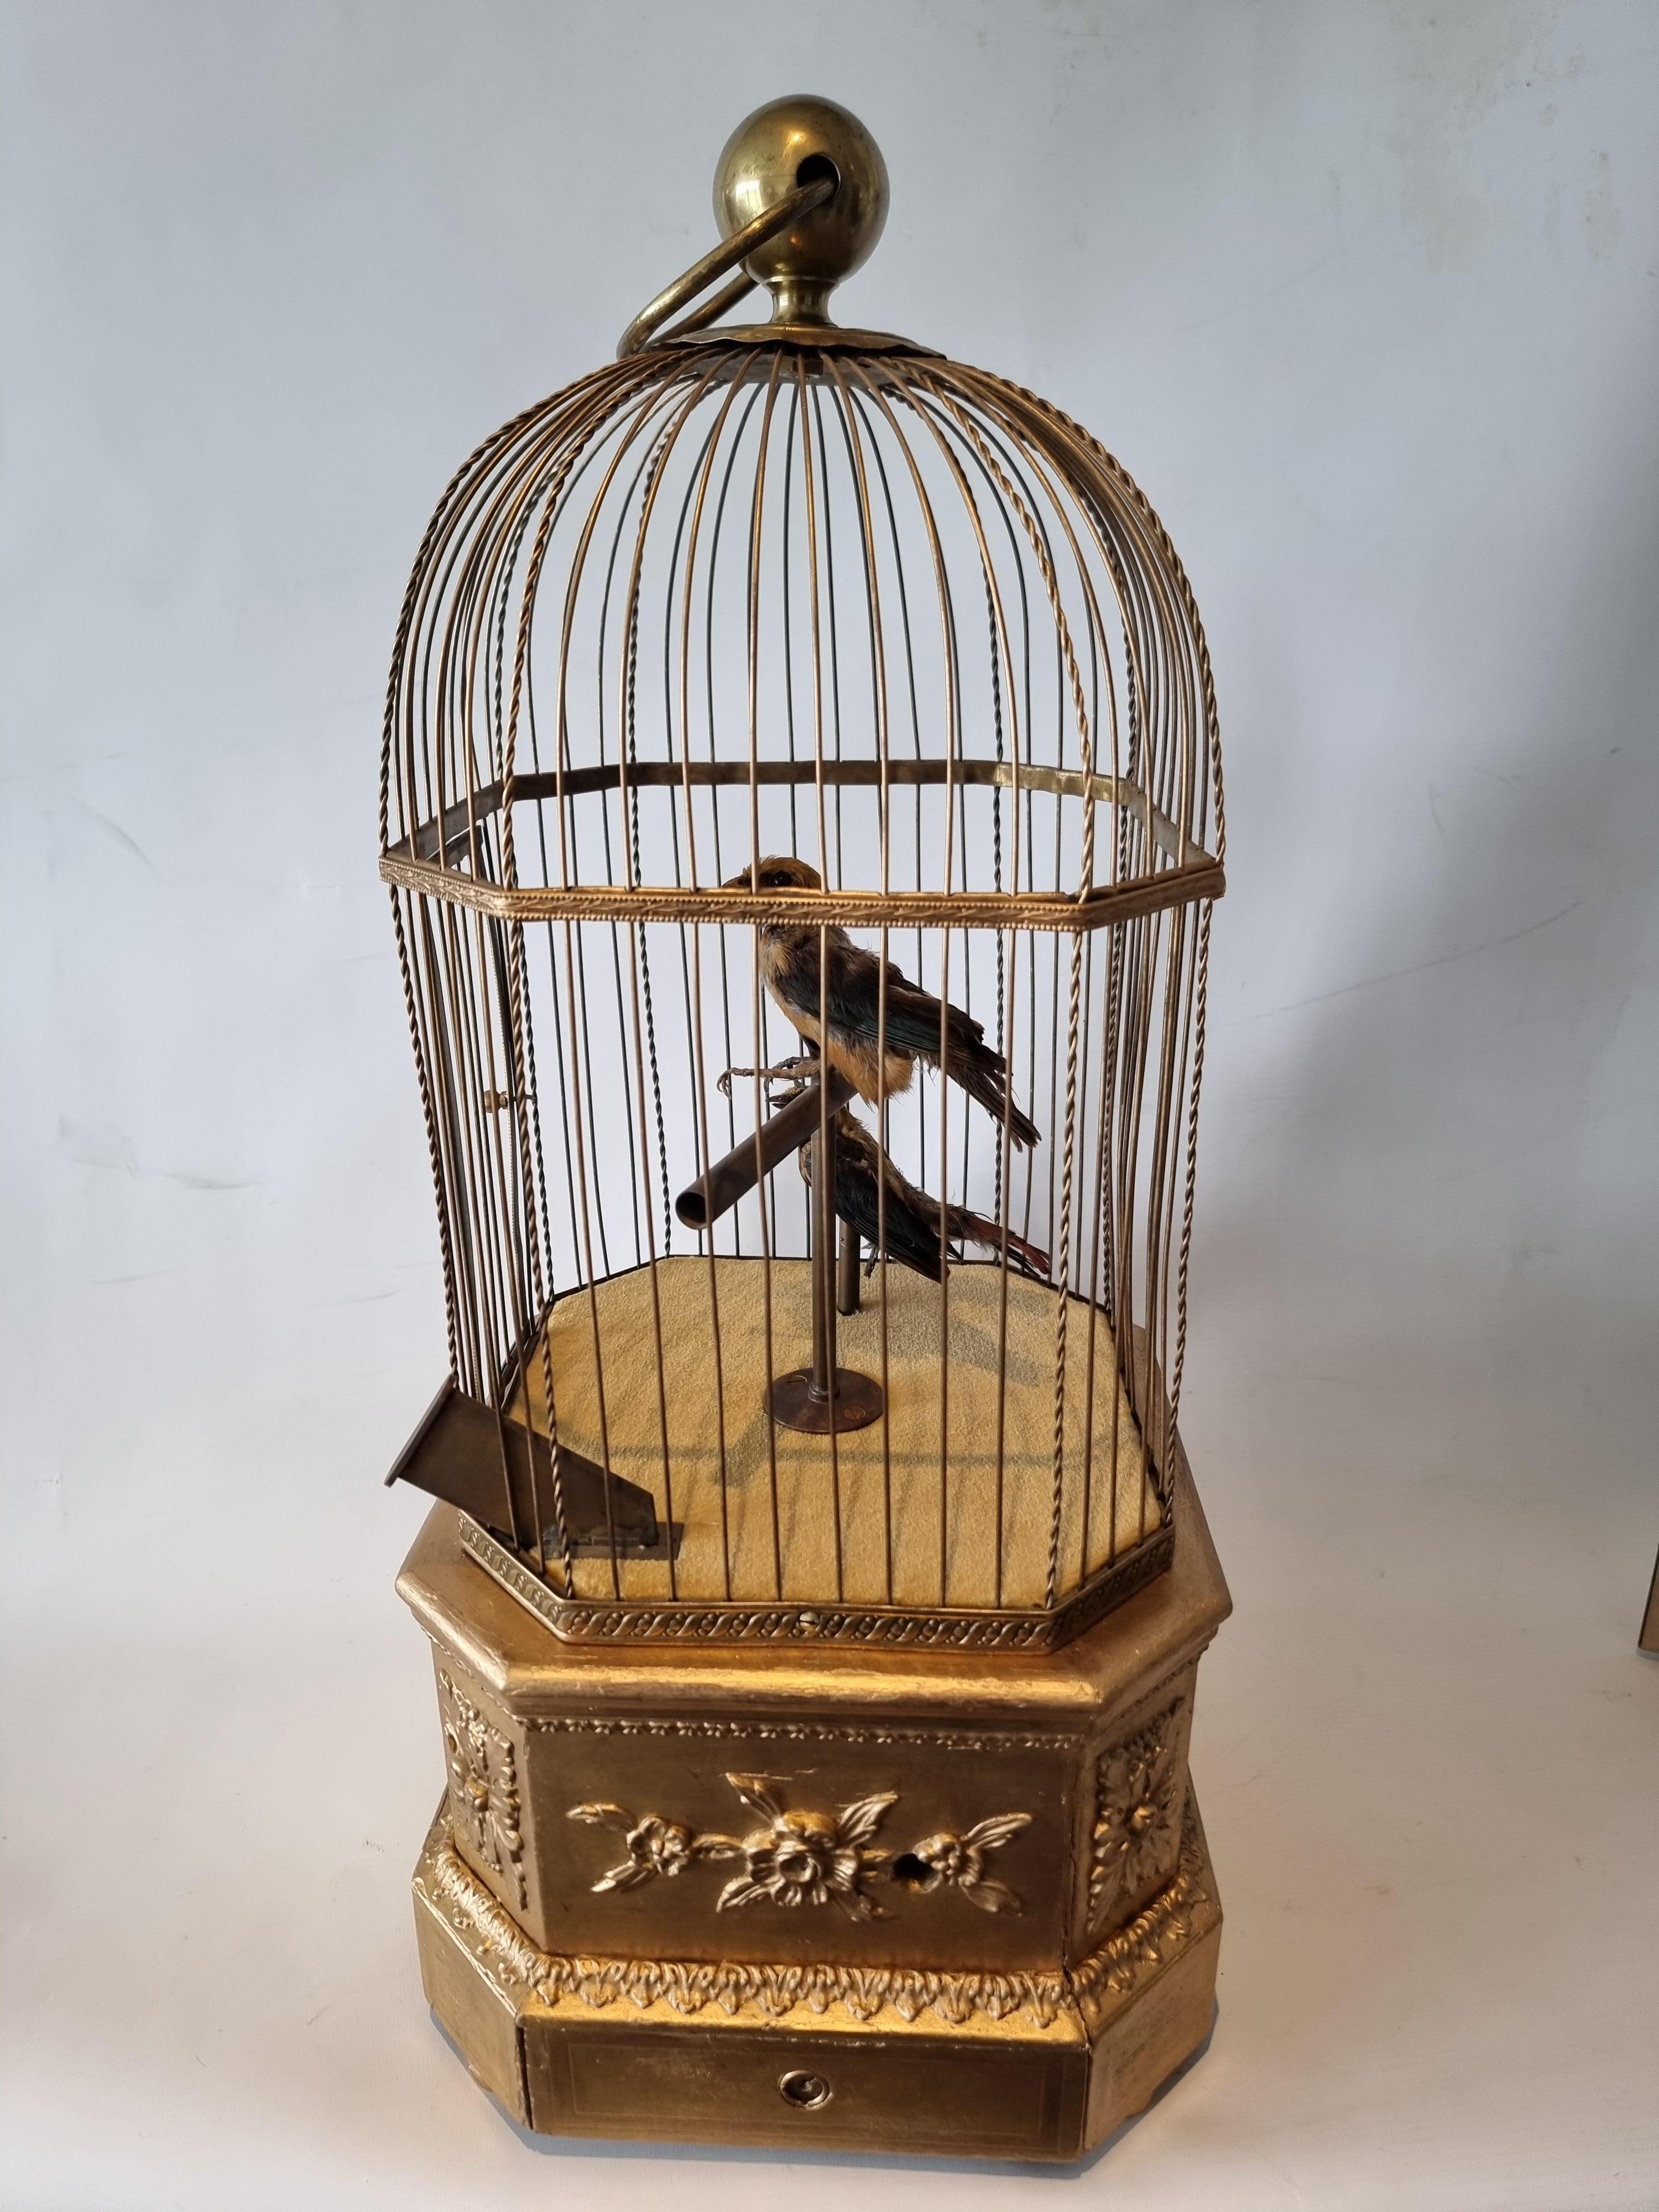 An antique coin-operated large double singing birds-in-cage, by Bontems,
 
French
 
circa 1900
 
Spend a penny in style
 
When wound and a 1d. coin inserted into the gilt metal chute to the front, the two full taxidermy birds spring to life, taking